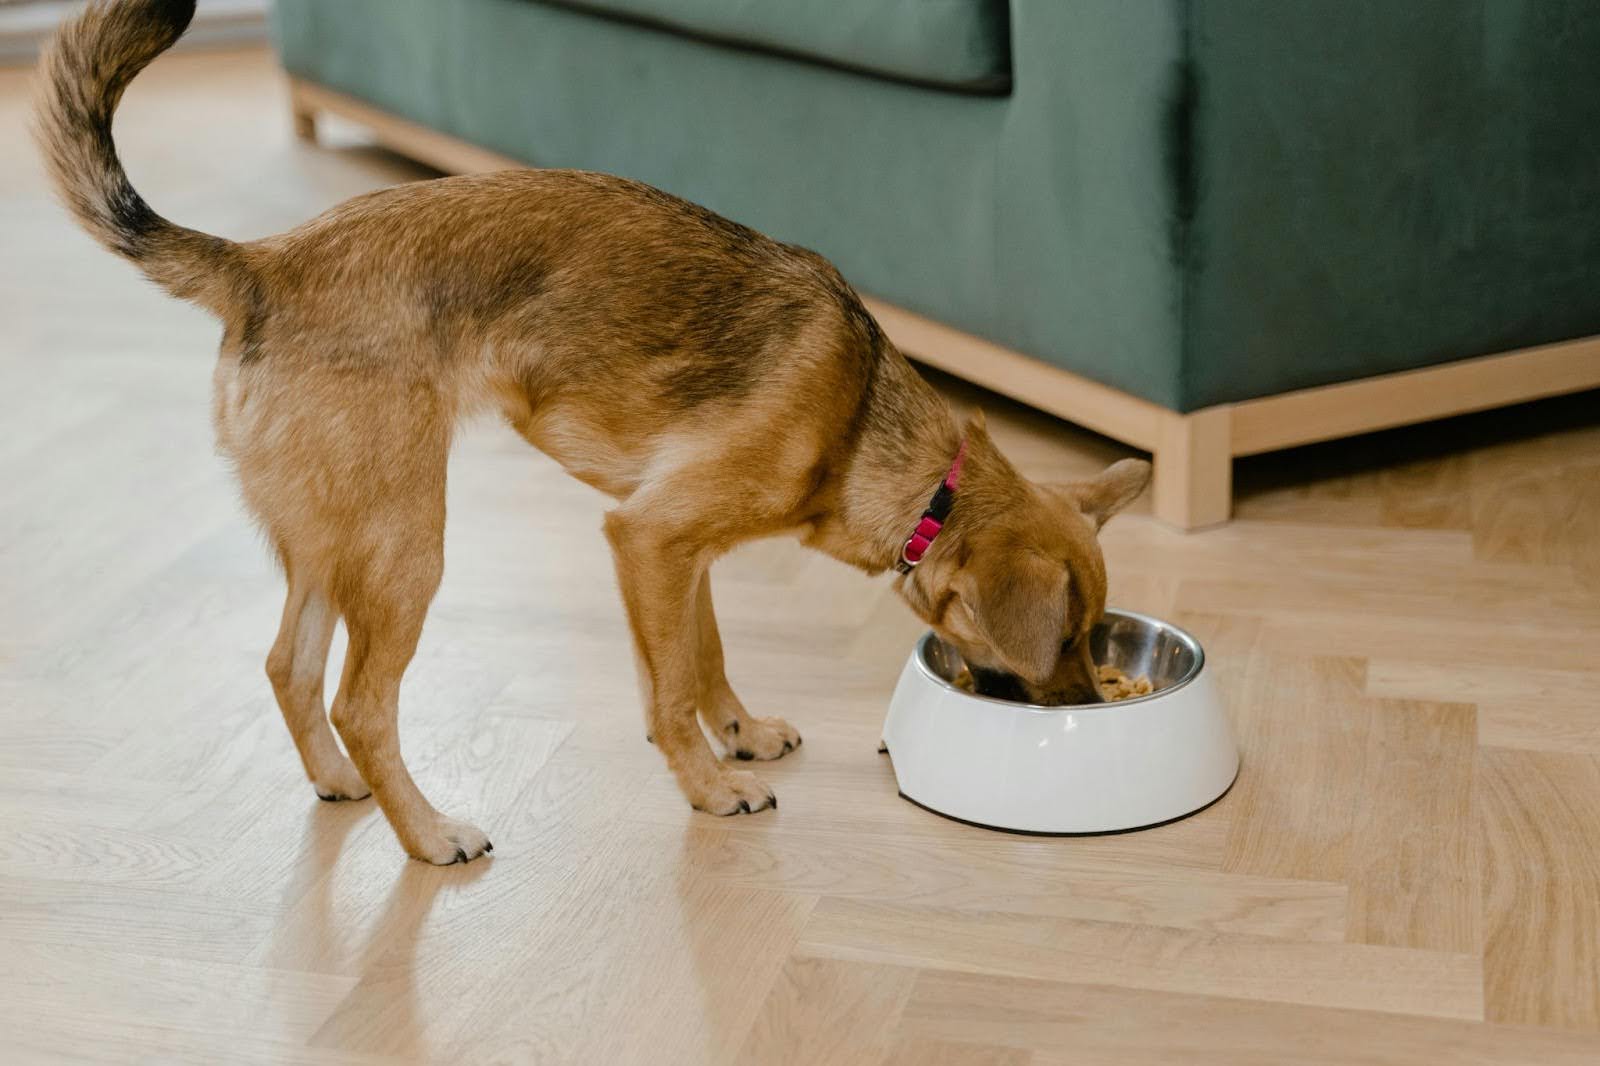 A slim brown and black dog with a red collar eats from a white dog dish on a hardwood floor.